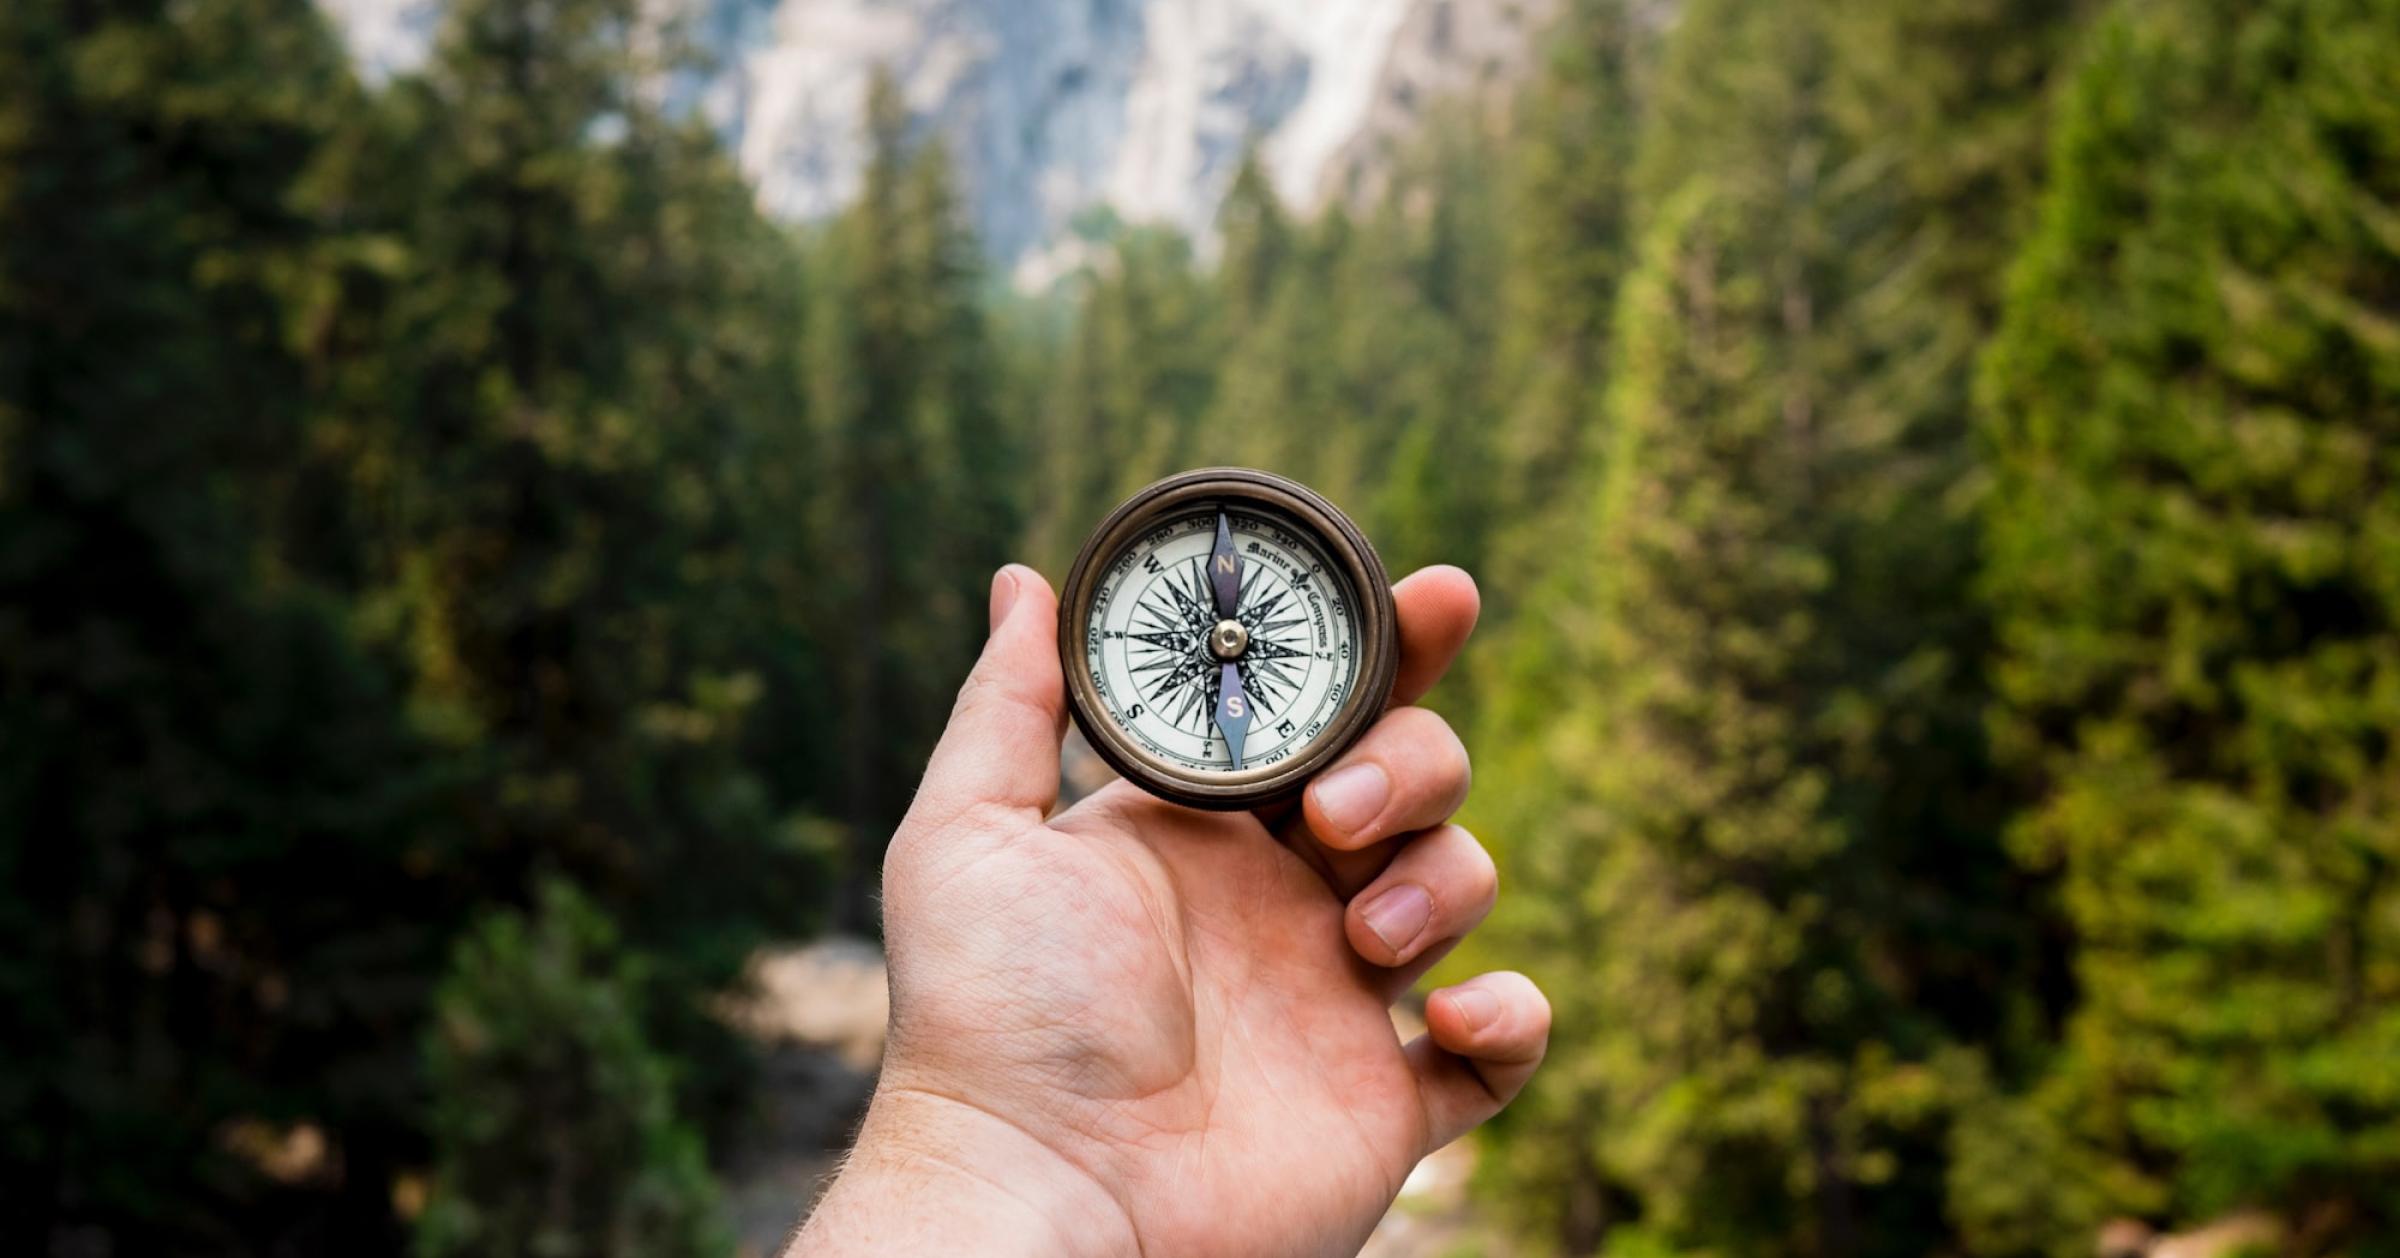 Hand holding a compass in the foreground against a background view of a mountain forest of evergreen trees.